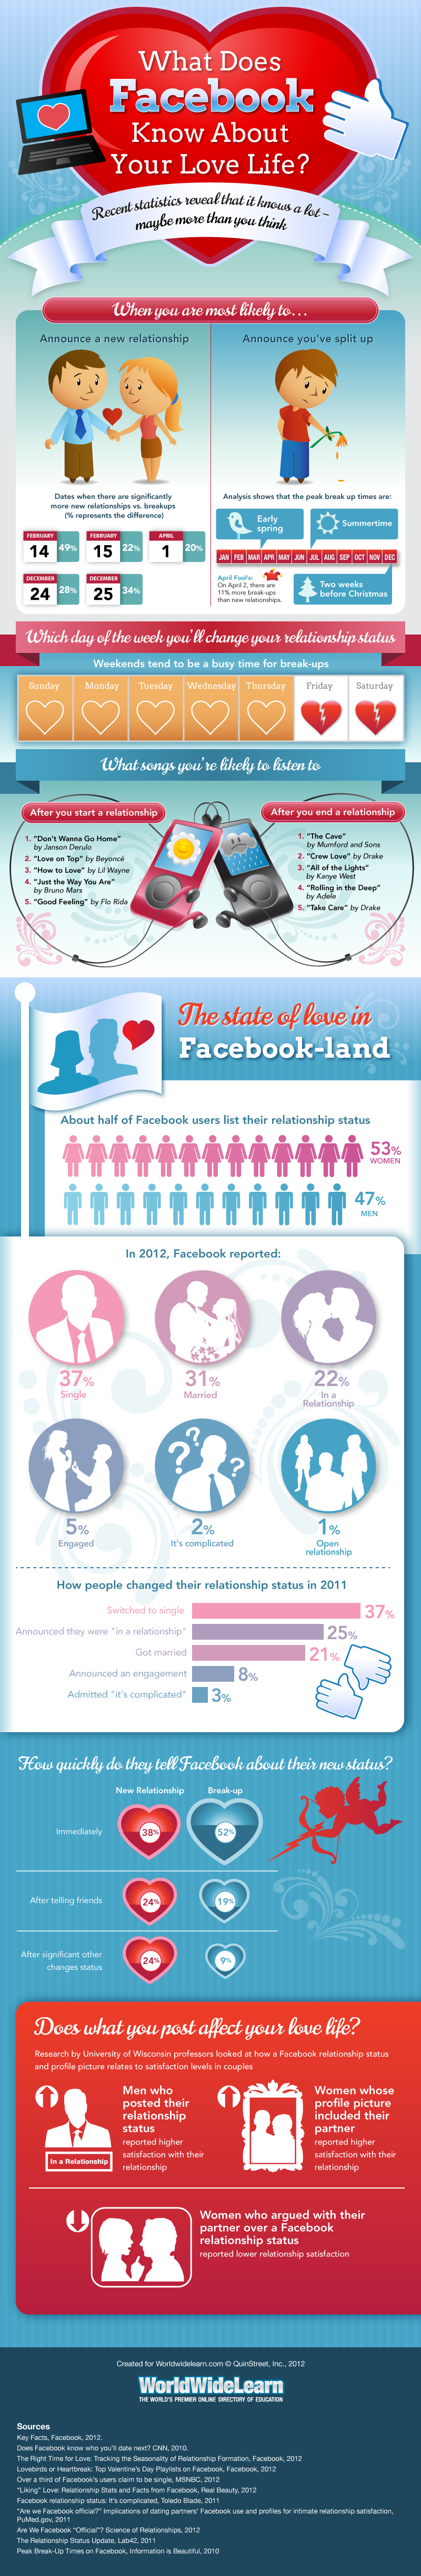 Facebook-And-Love-Life-infographic